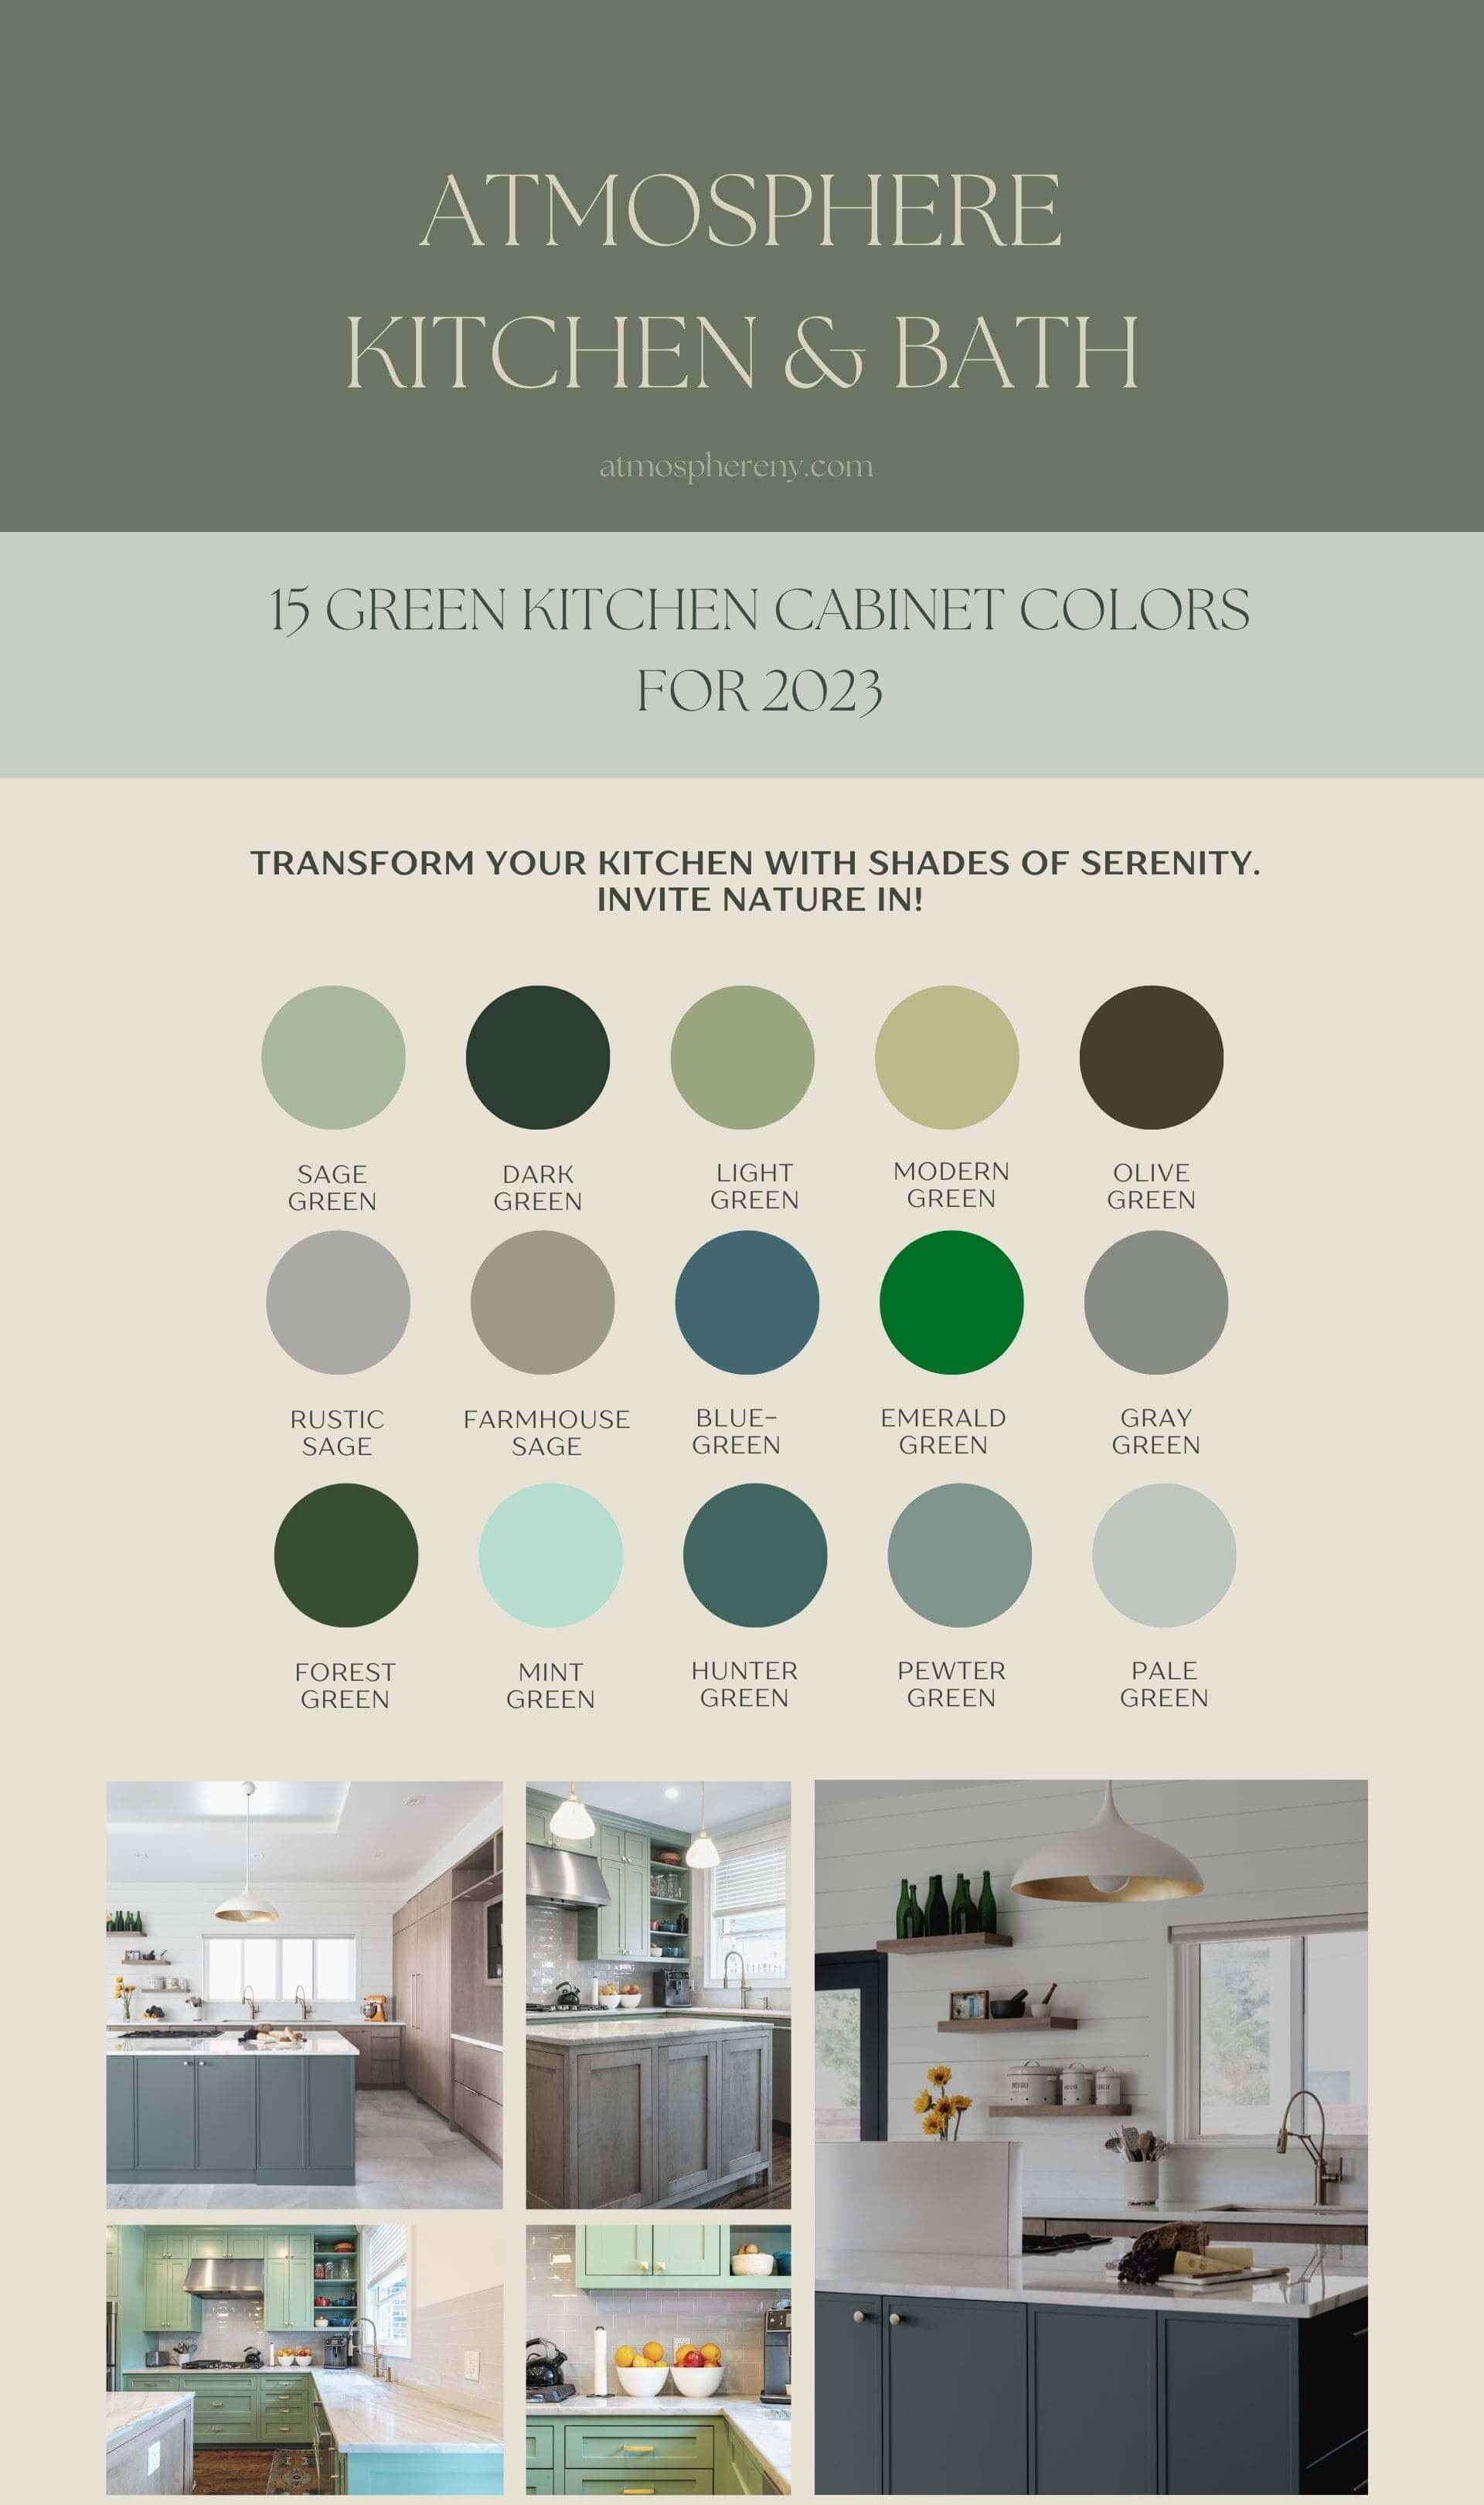 15 Most Popular Sage Green Paint Colors for That Calm, Earthy Vibe